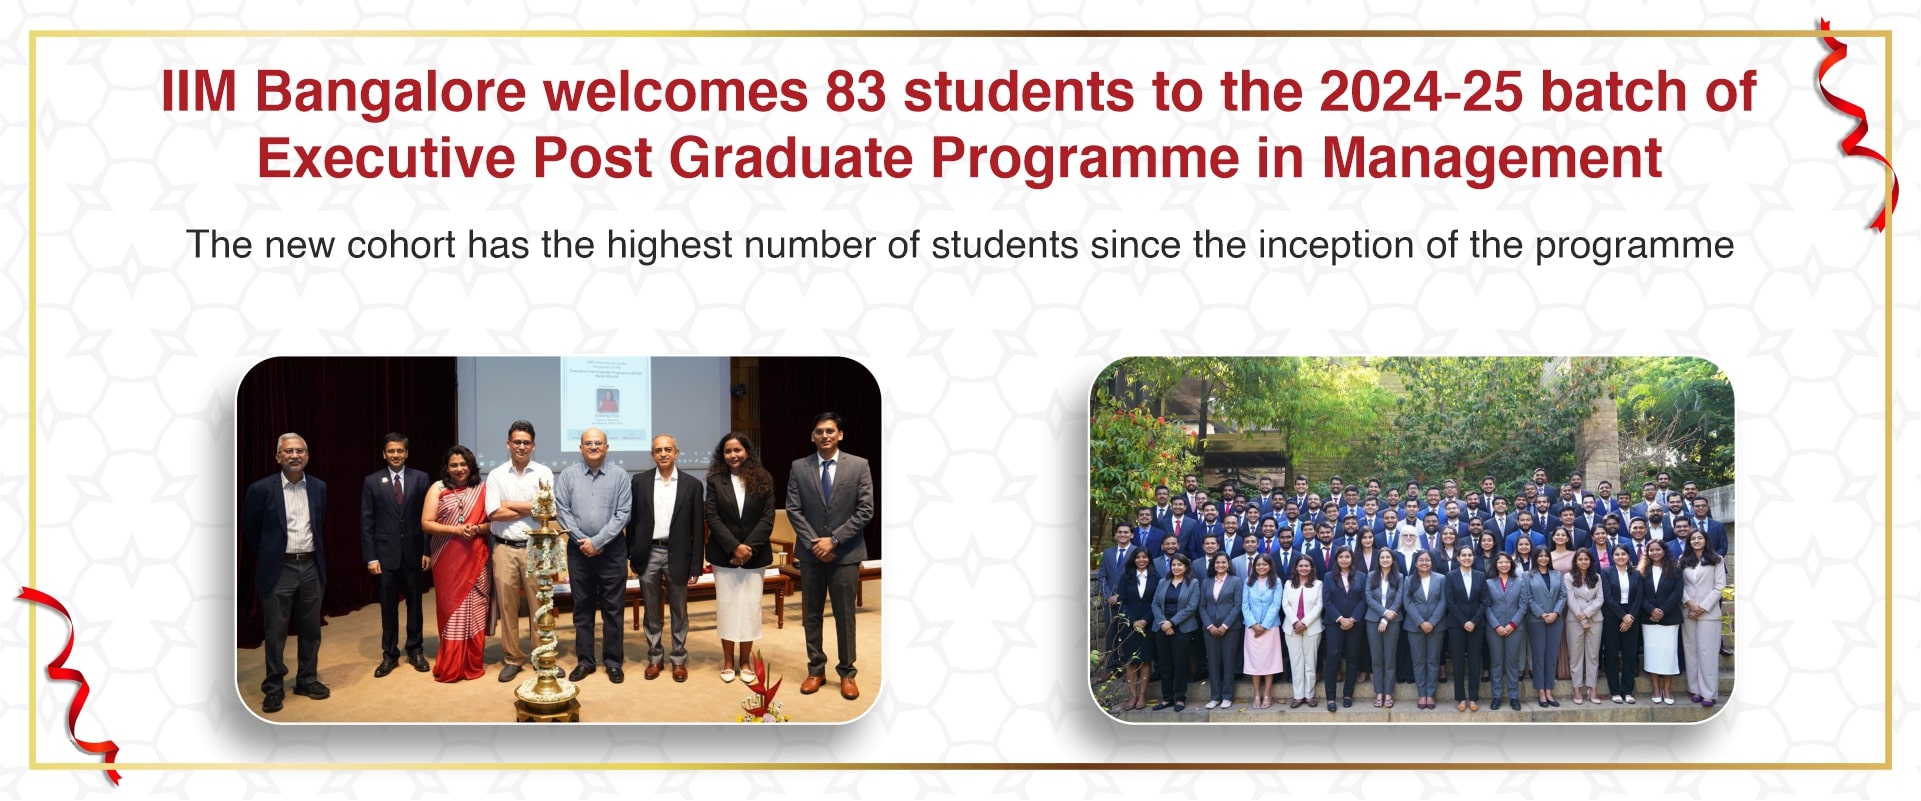 IIM Bangalore welcomes 83 students to the 2024-25 batch of Executive Post Graduate Programme in Management